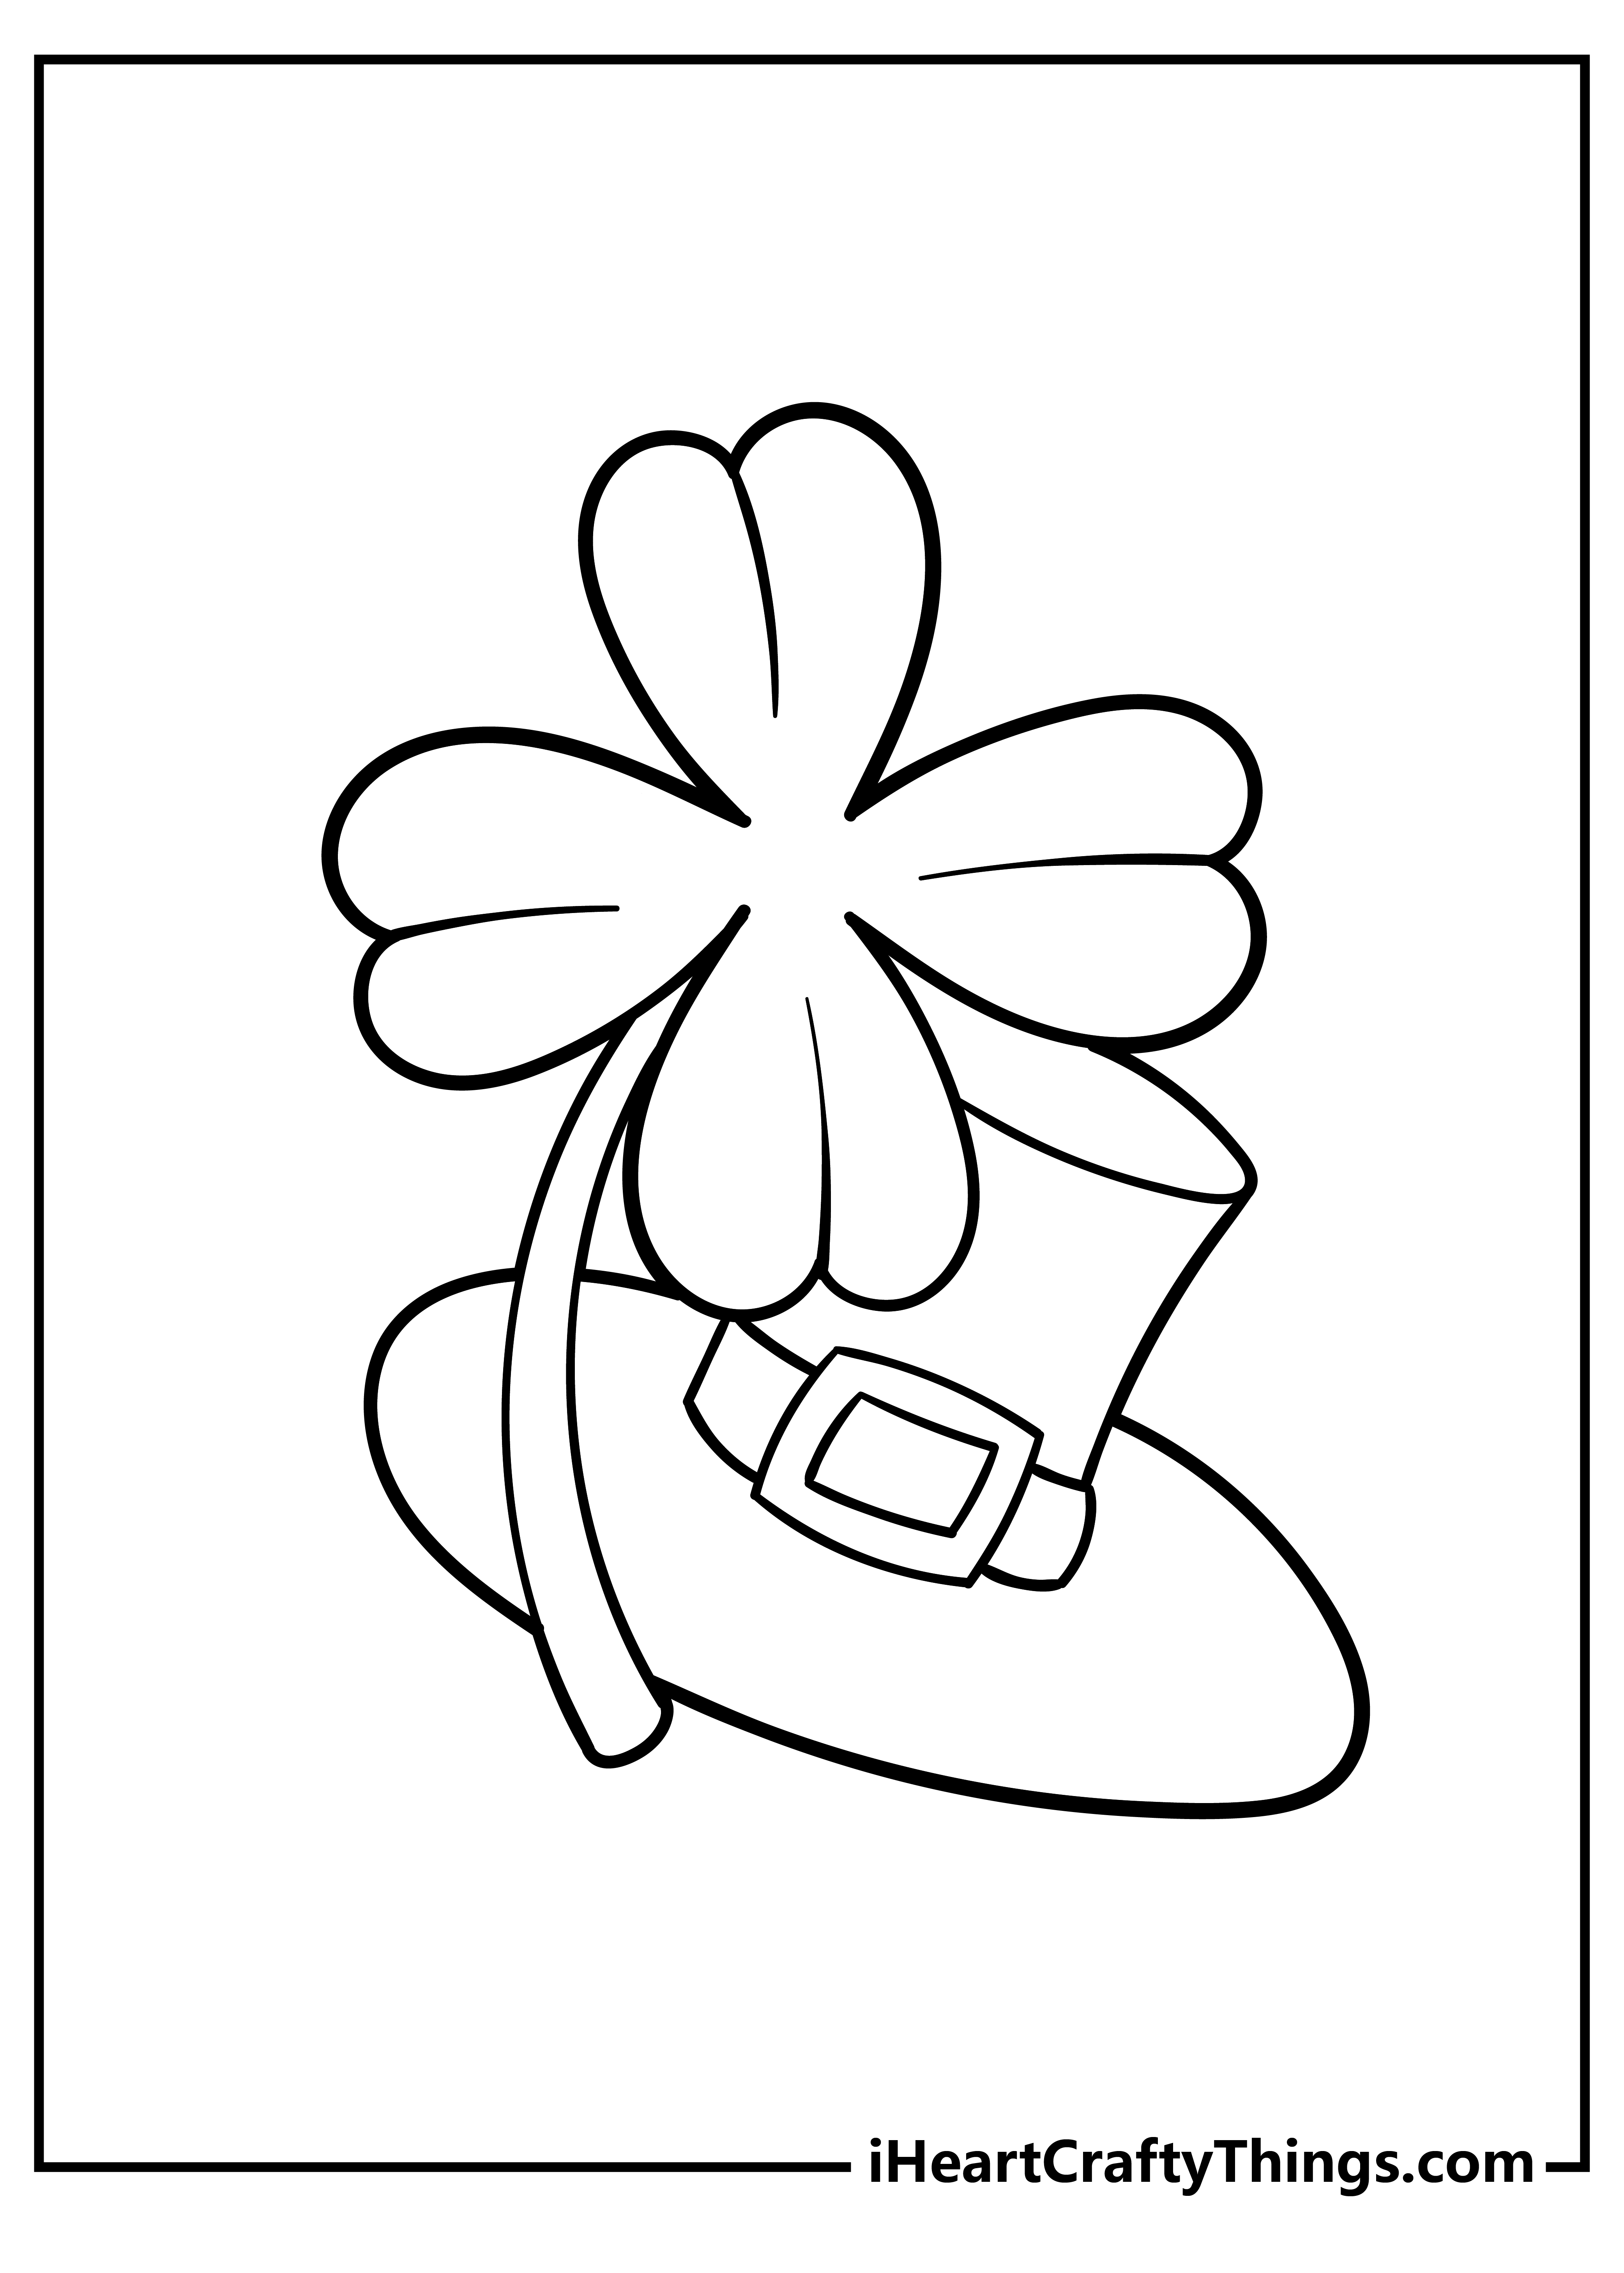 St Patrick’s Day Coloring Sheet for children free download